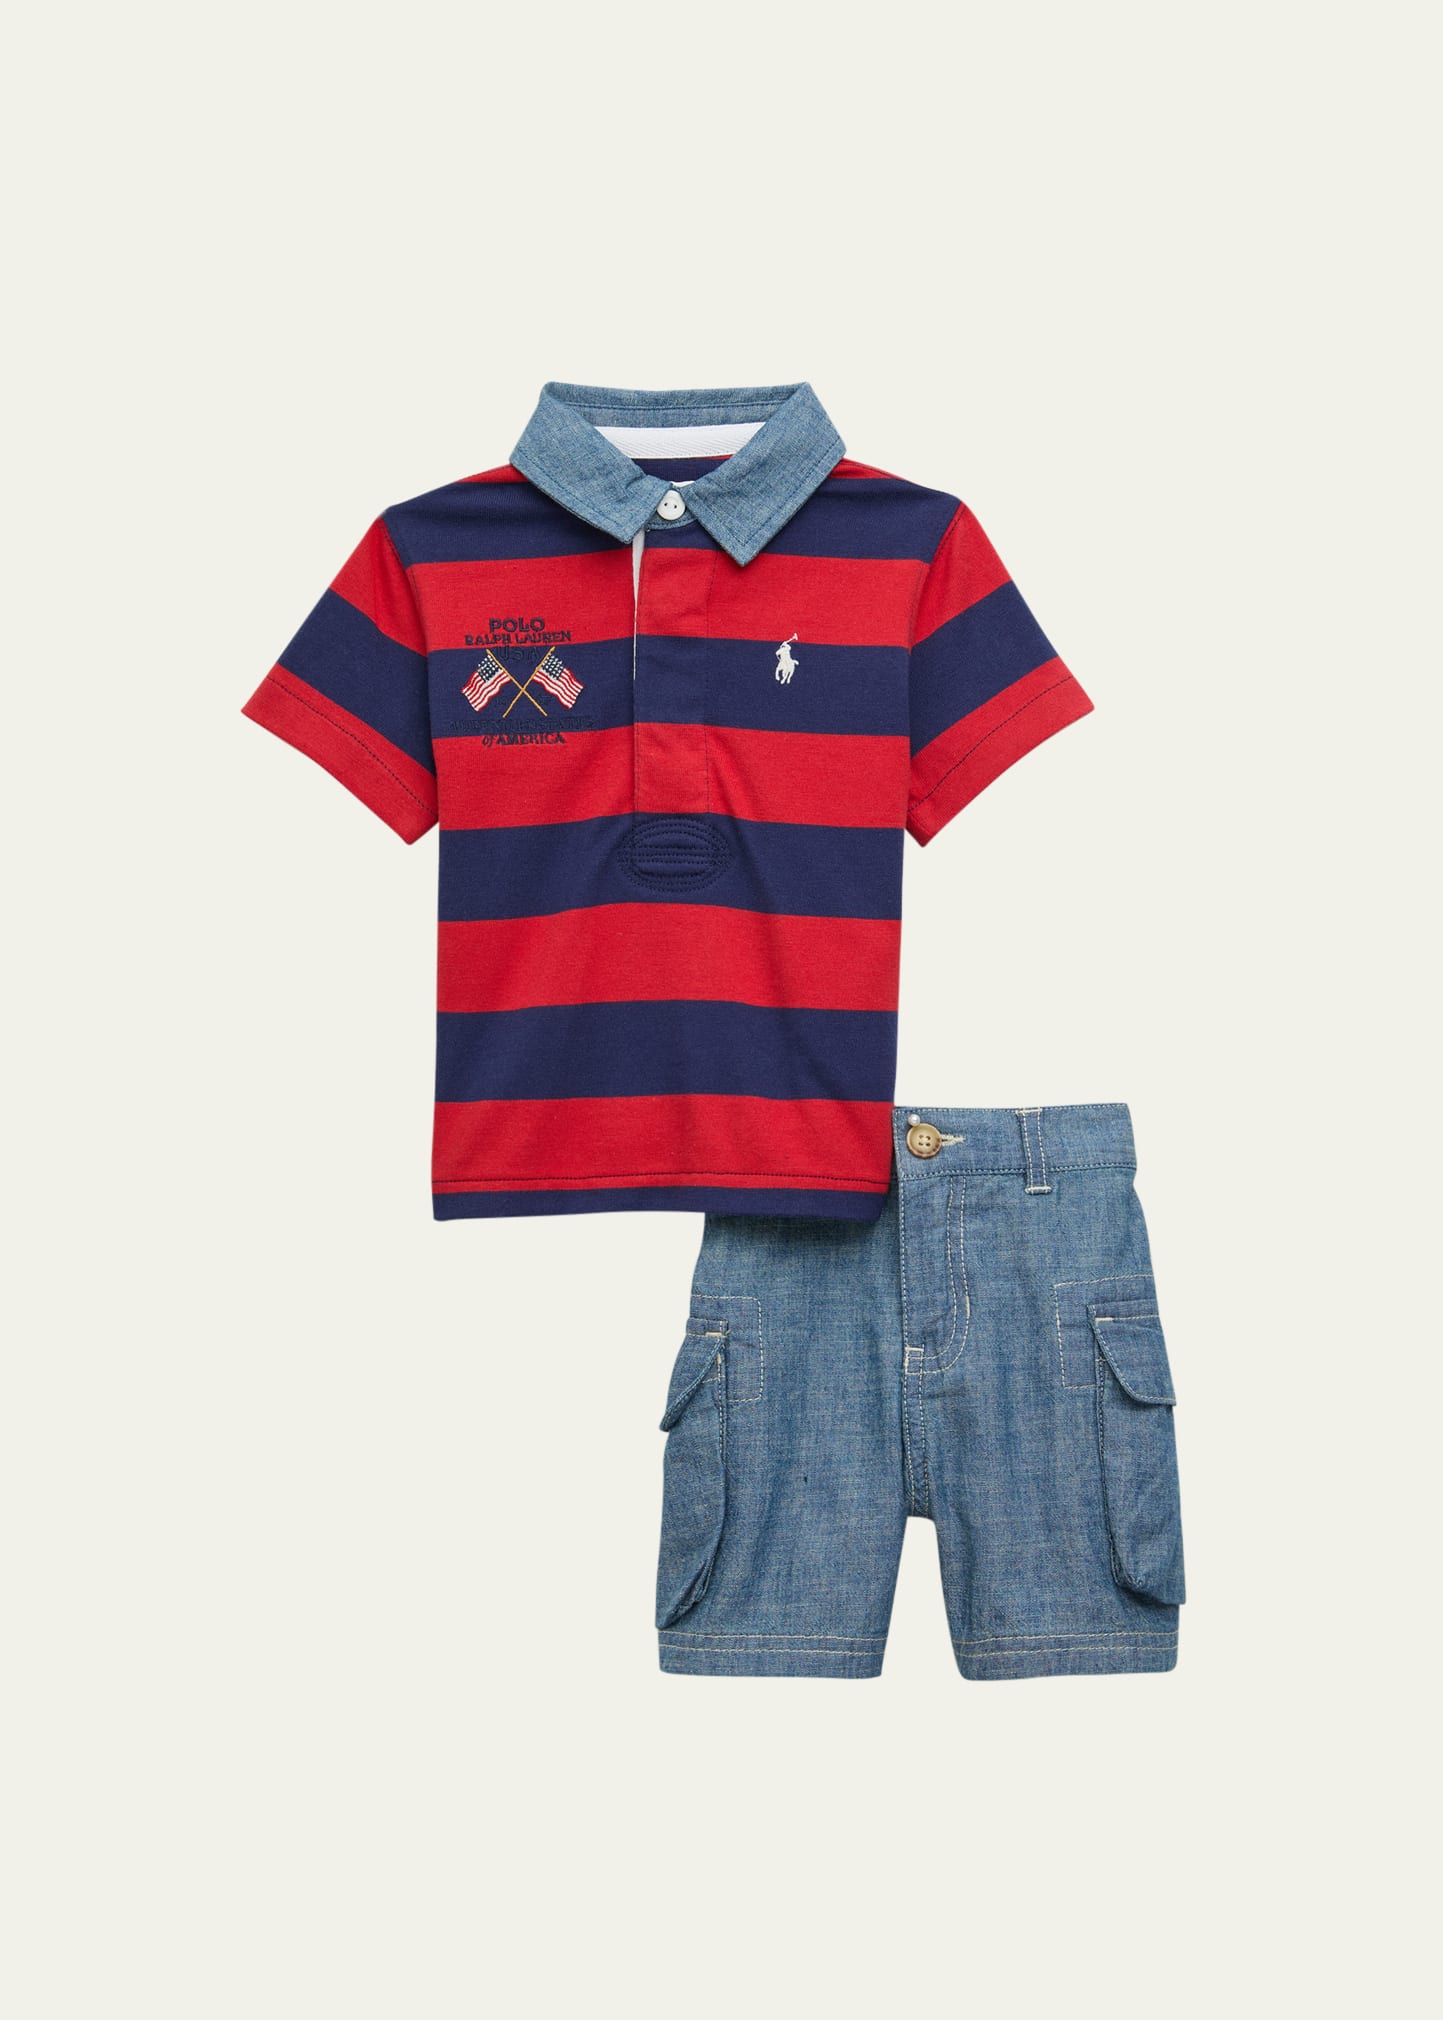 Ralph Lauren Kids' Boy's Embroidered Rugby Shirt & Chambray Shorts Set In Evening Post Red